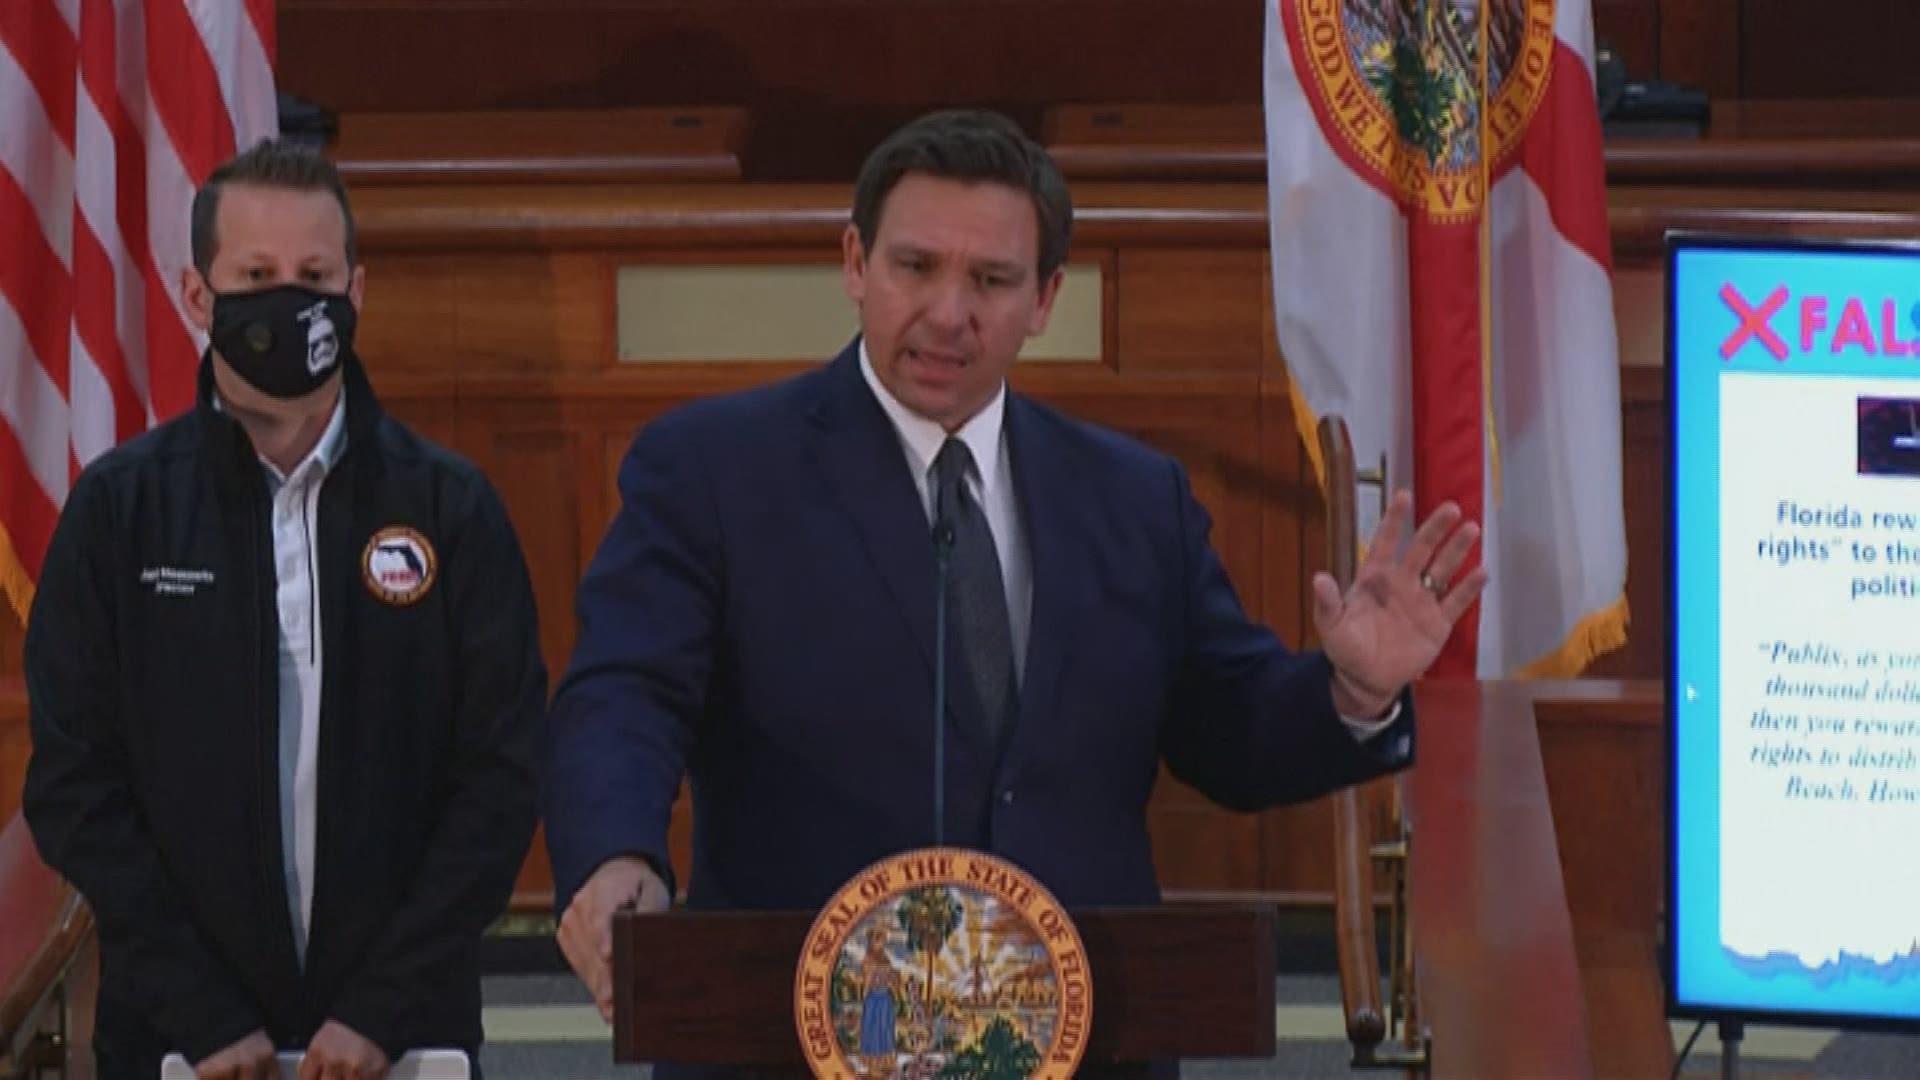 "It was malicious what they did," said DeSantis.